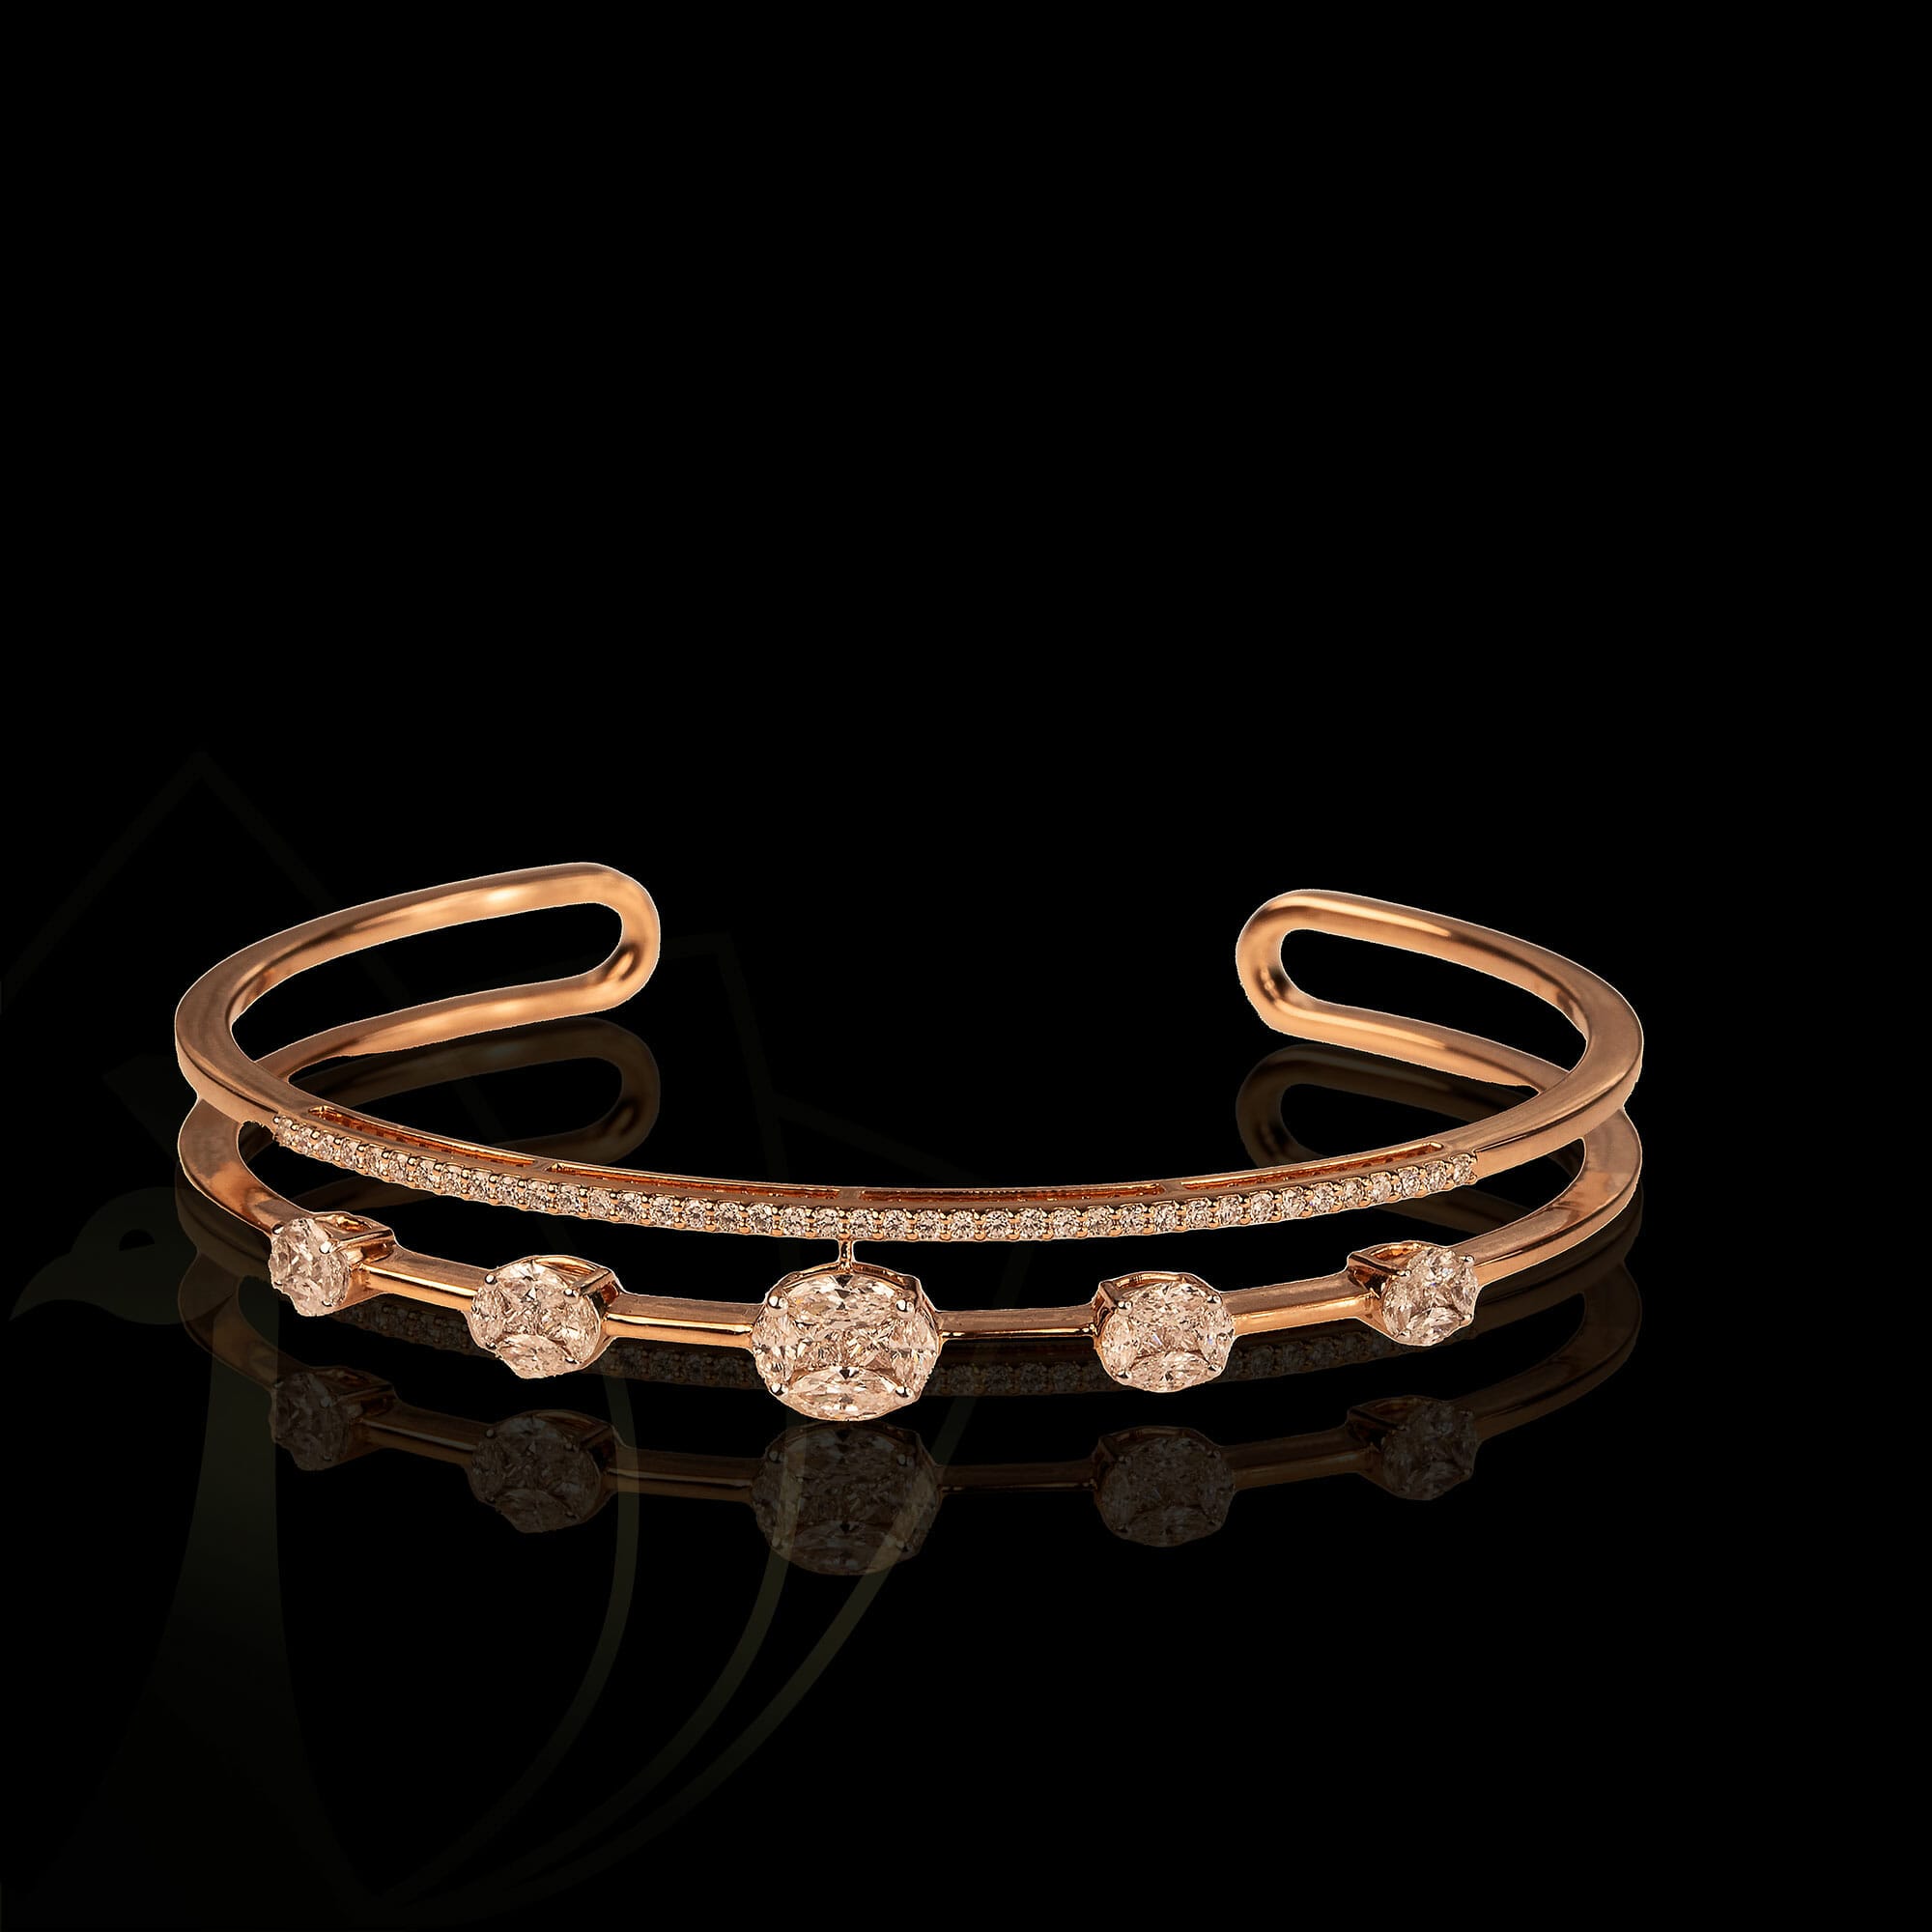 Imperial Indulgence Diamond Bracelet from our exclusive Gulz Collection